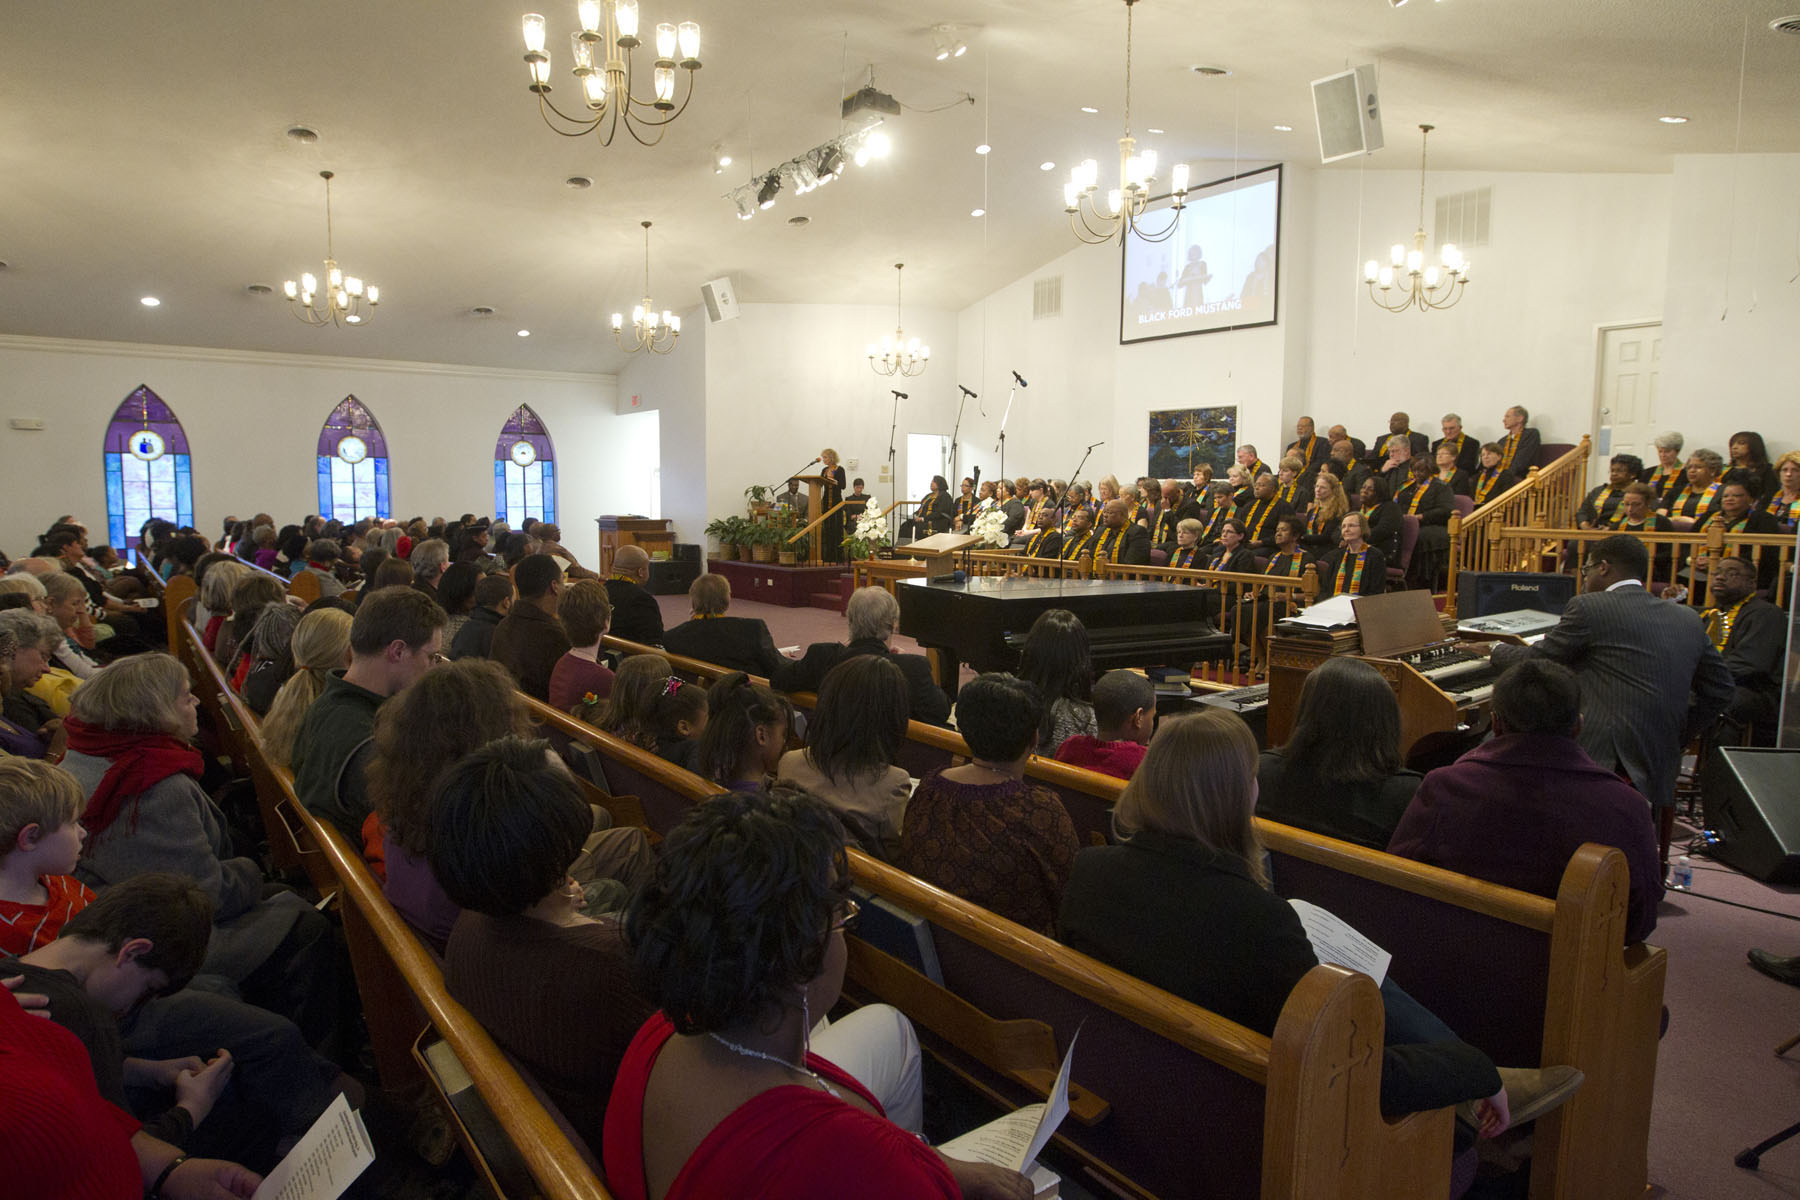 Mount Zion First African Baptist Church packed with people has they have a service in honor of Martin Luther King Jr.